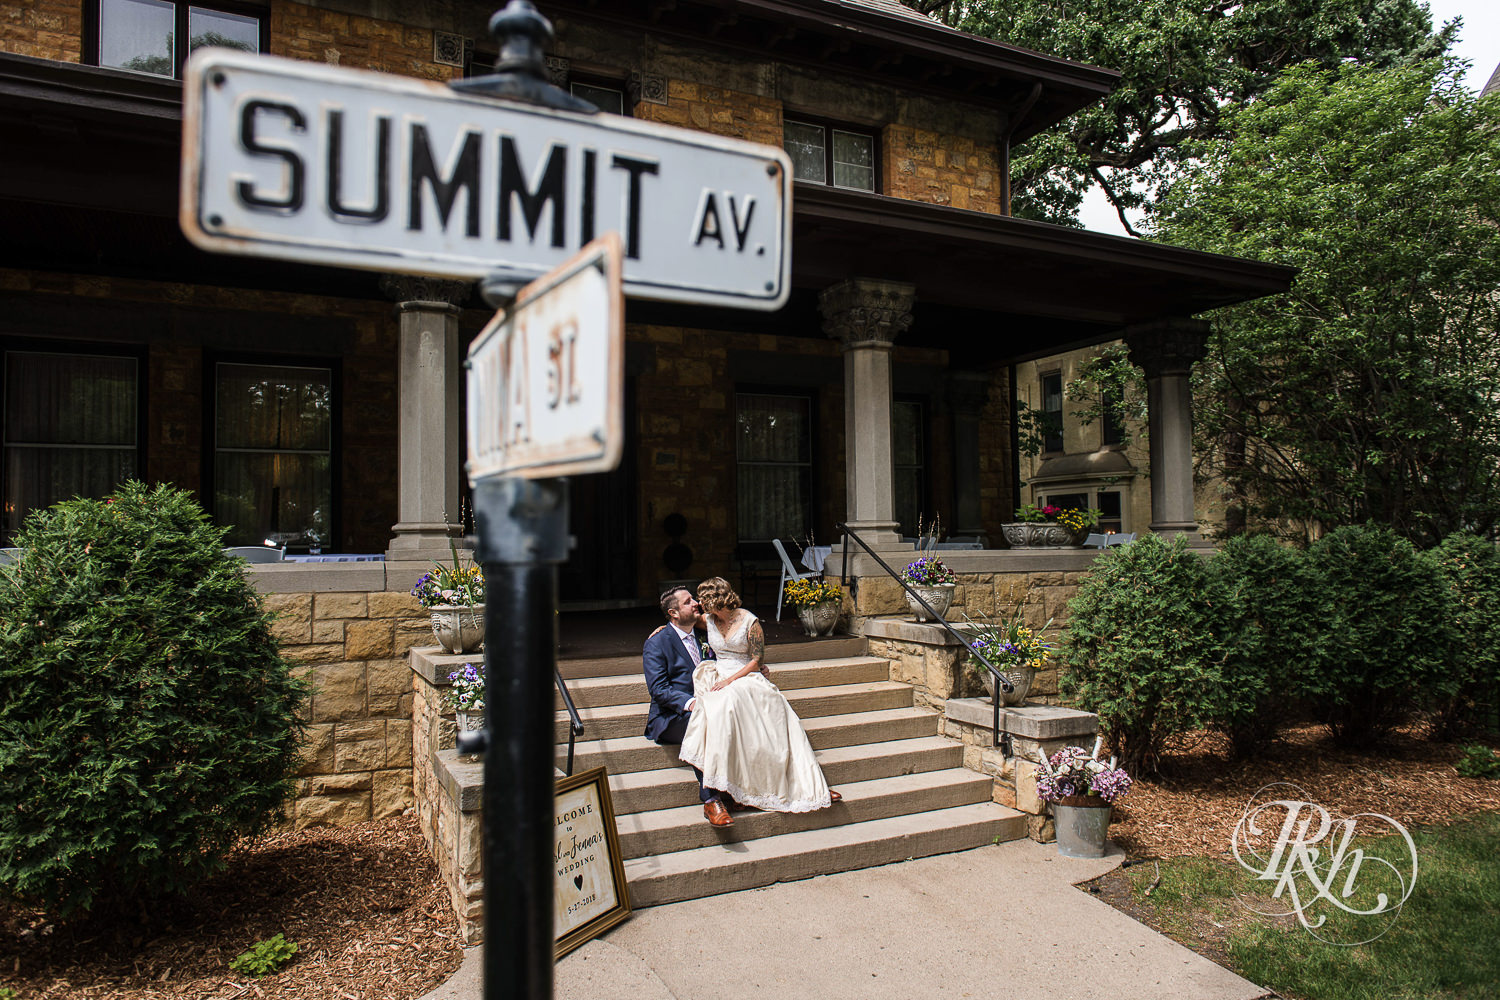 Bride and groom smile in front of Summit Manor Reception House in Saint Paul, Minnesota.